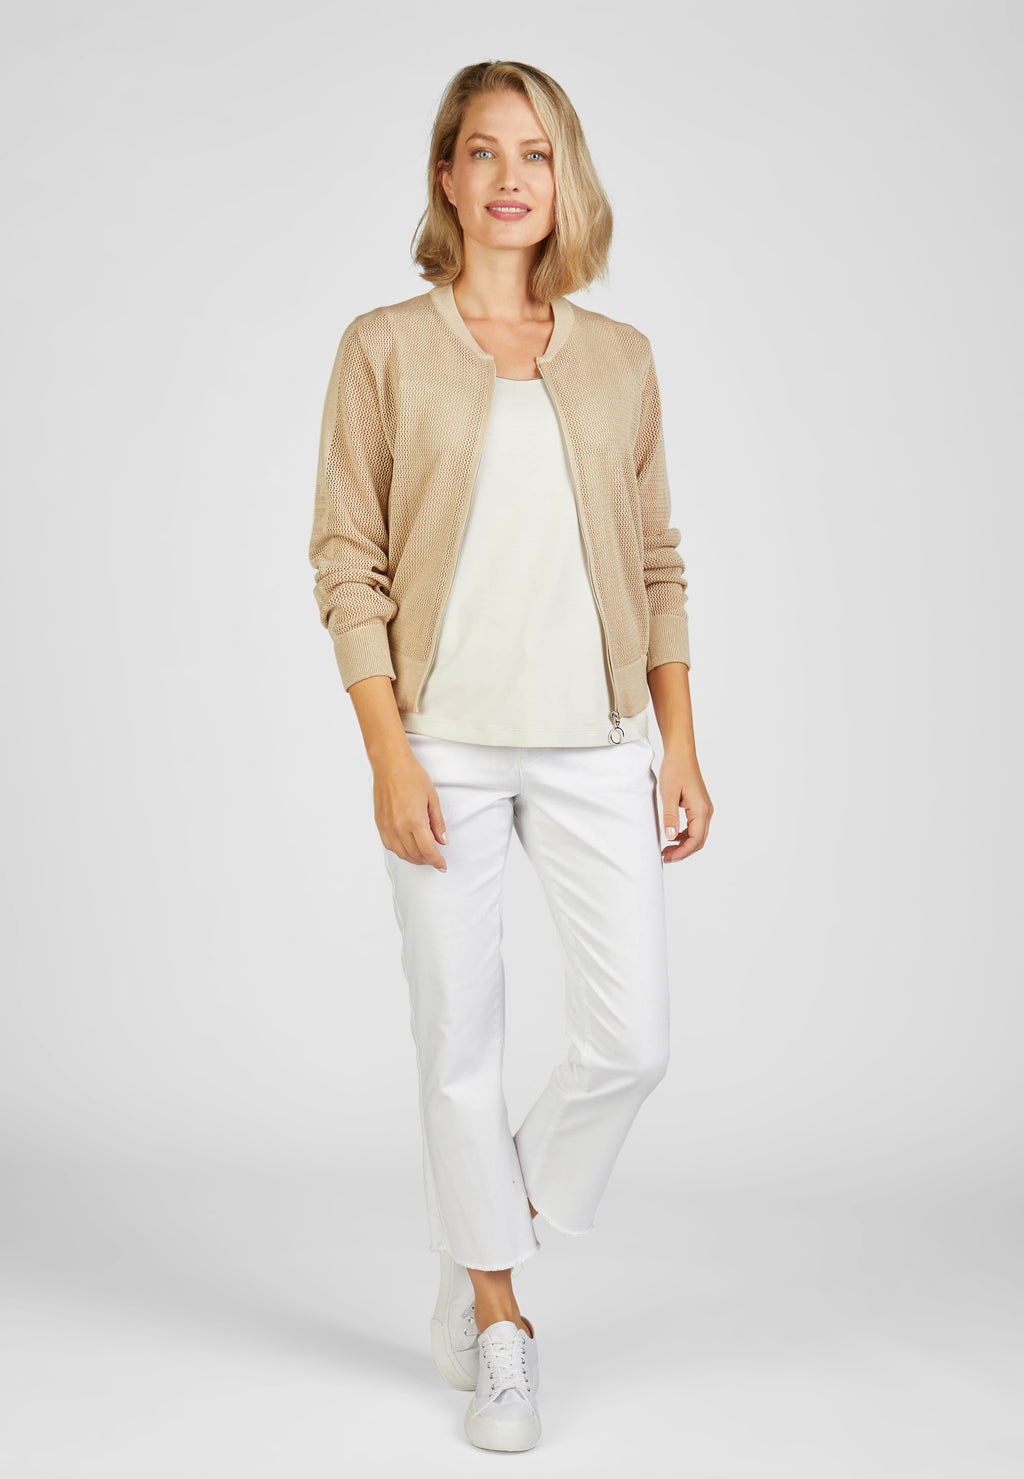 Rabe sunset bay collection zip up cardigan in beige, product code 52-224520